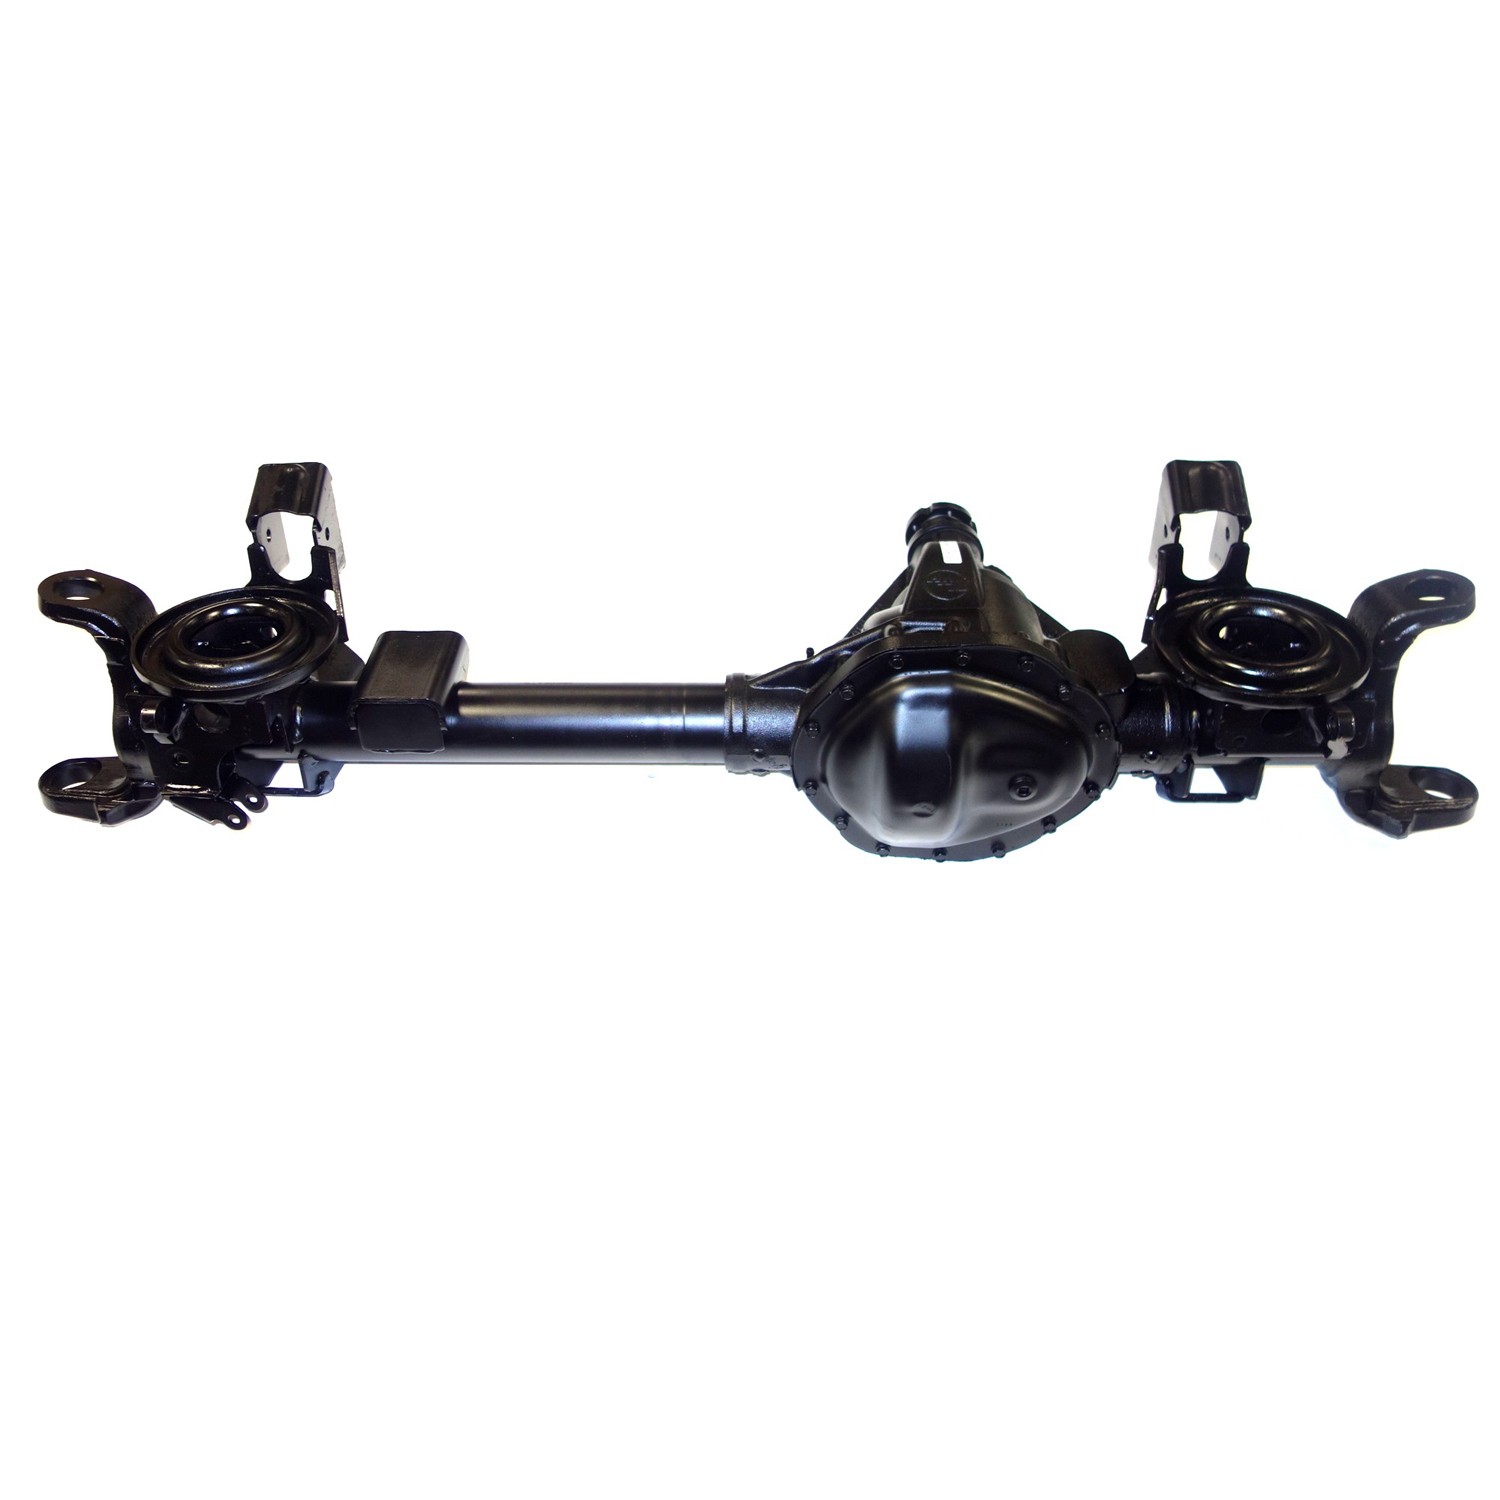 Zumbrota Remanufactured Front Axle Assembly 2010-2011 Chrysler 4.11 Ratio